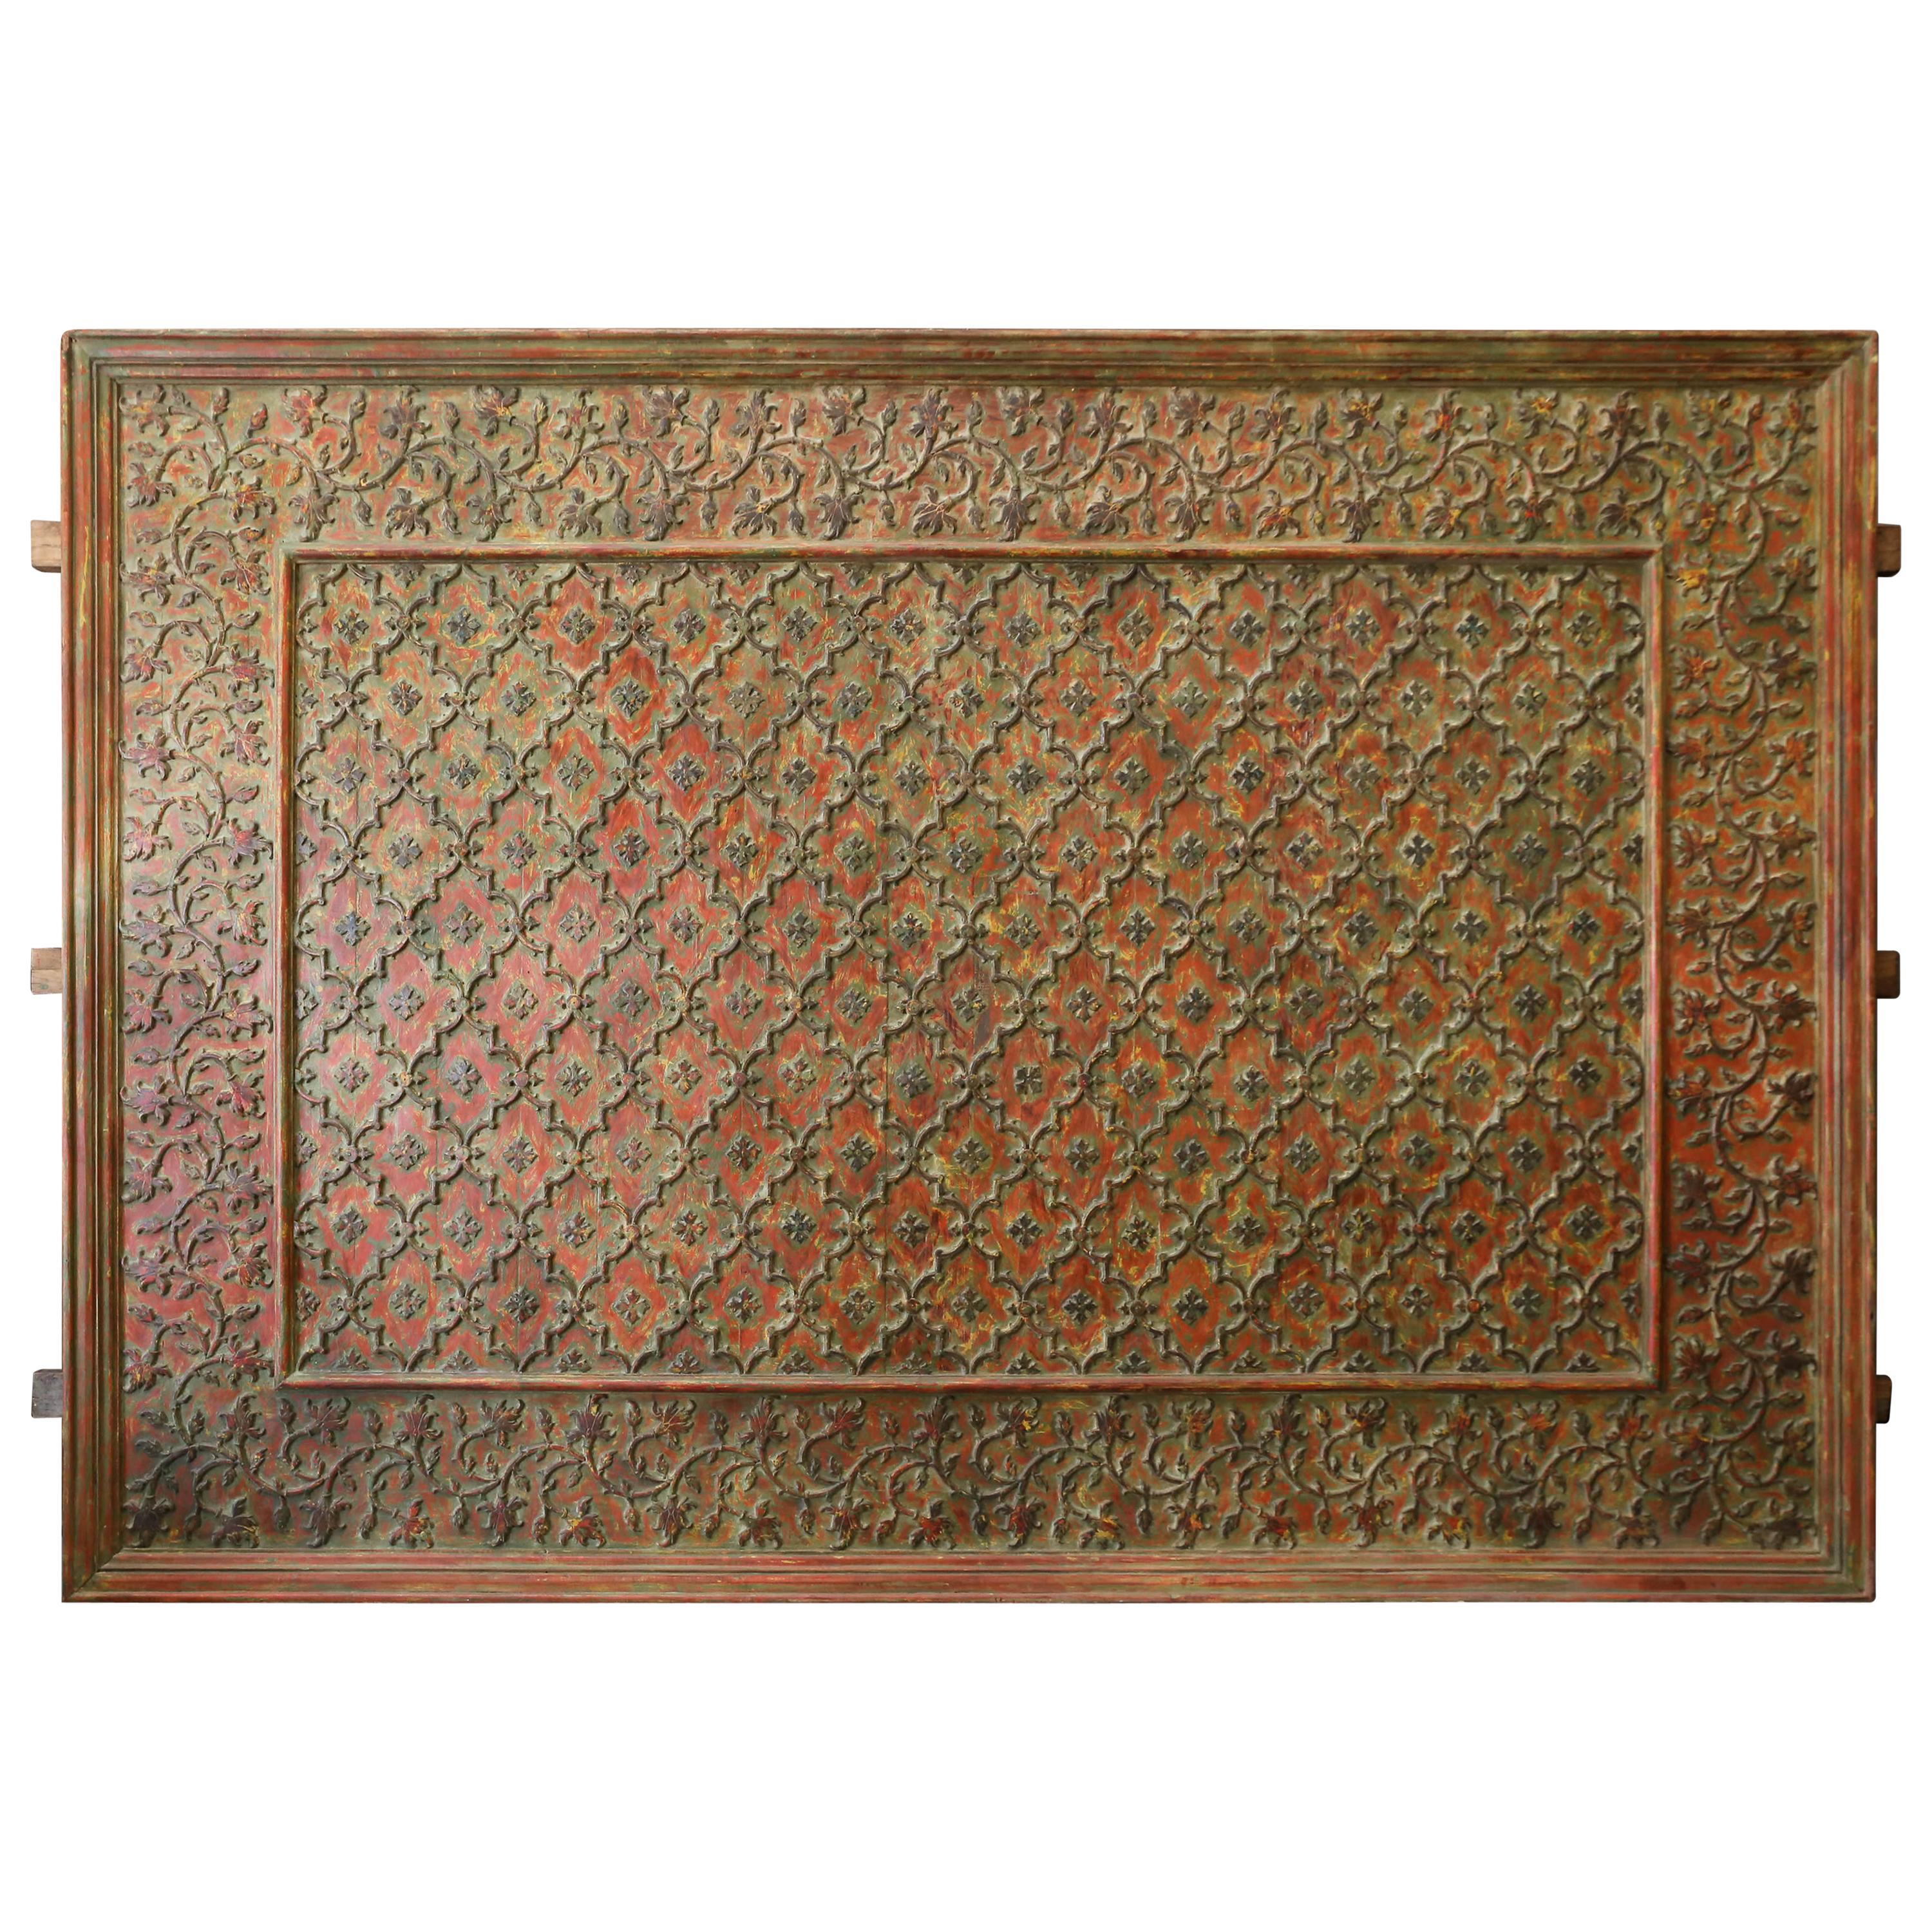 1840s Teak Wood and Bronze Monumental Ceiling from a Jain Temple in Gujarat For Sale